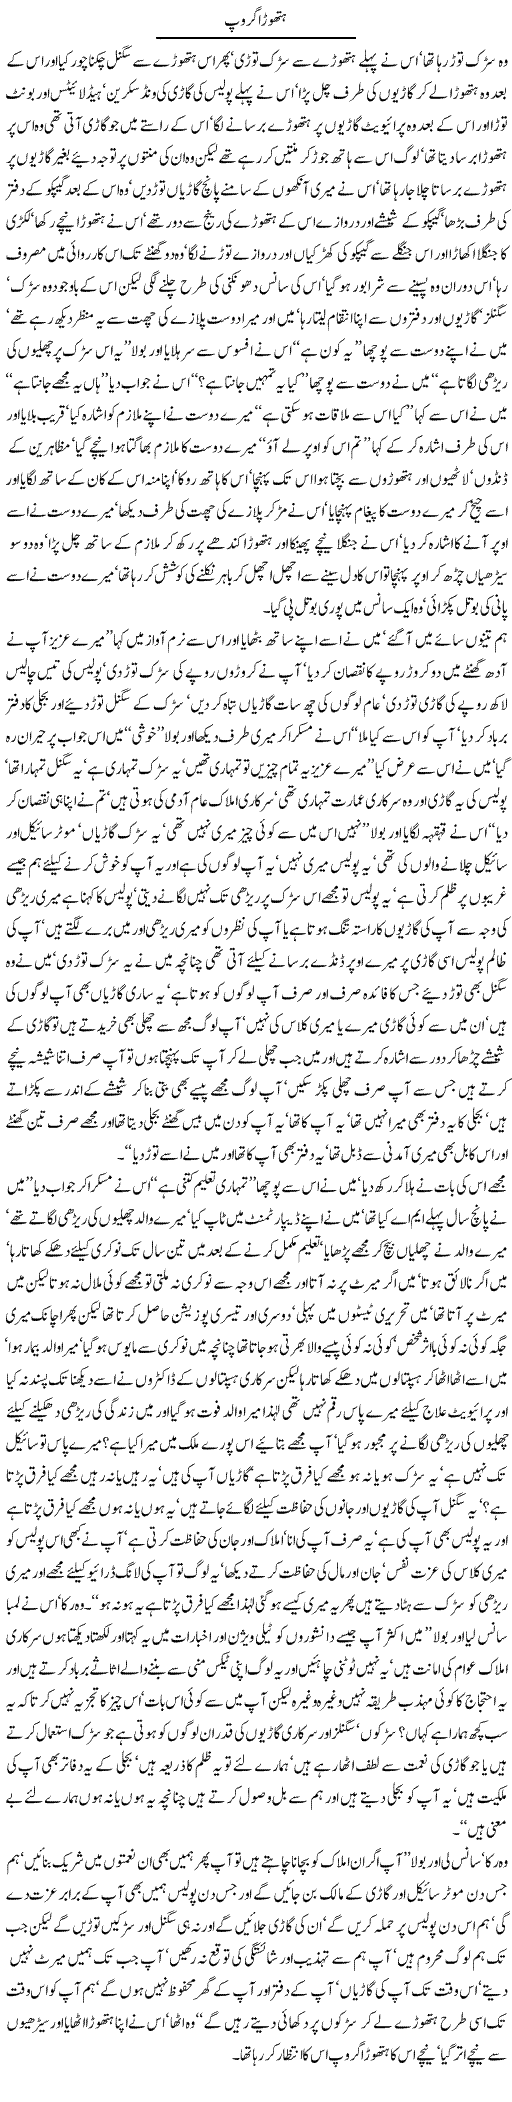 Breaking Everything Express Column Javed Chaudhry 6 October 2011